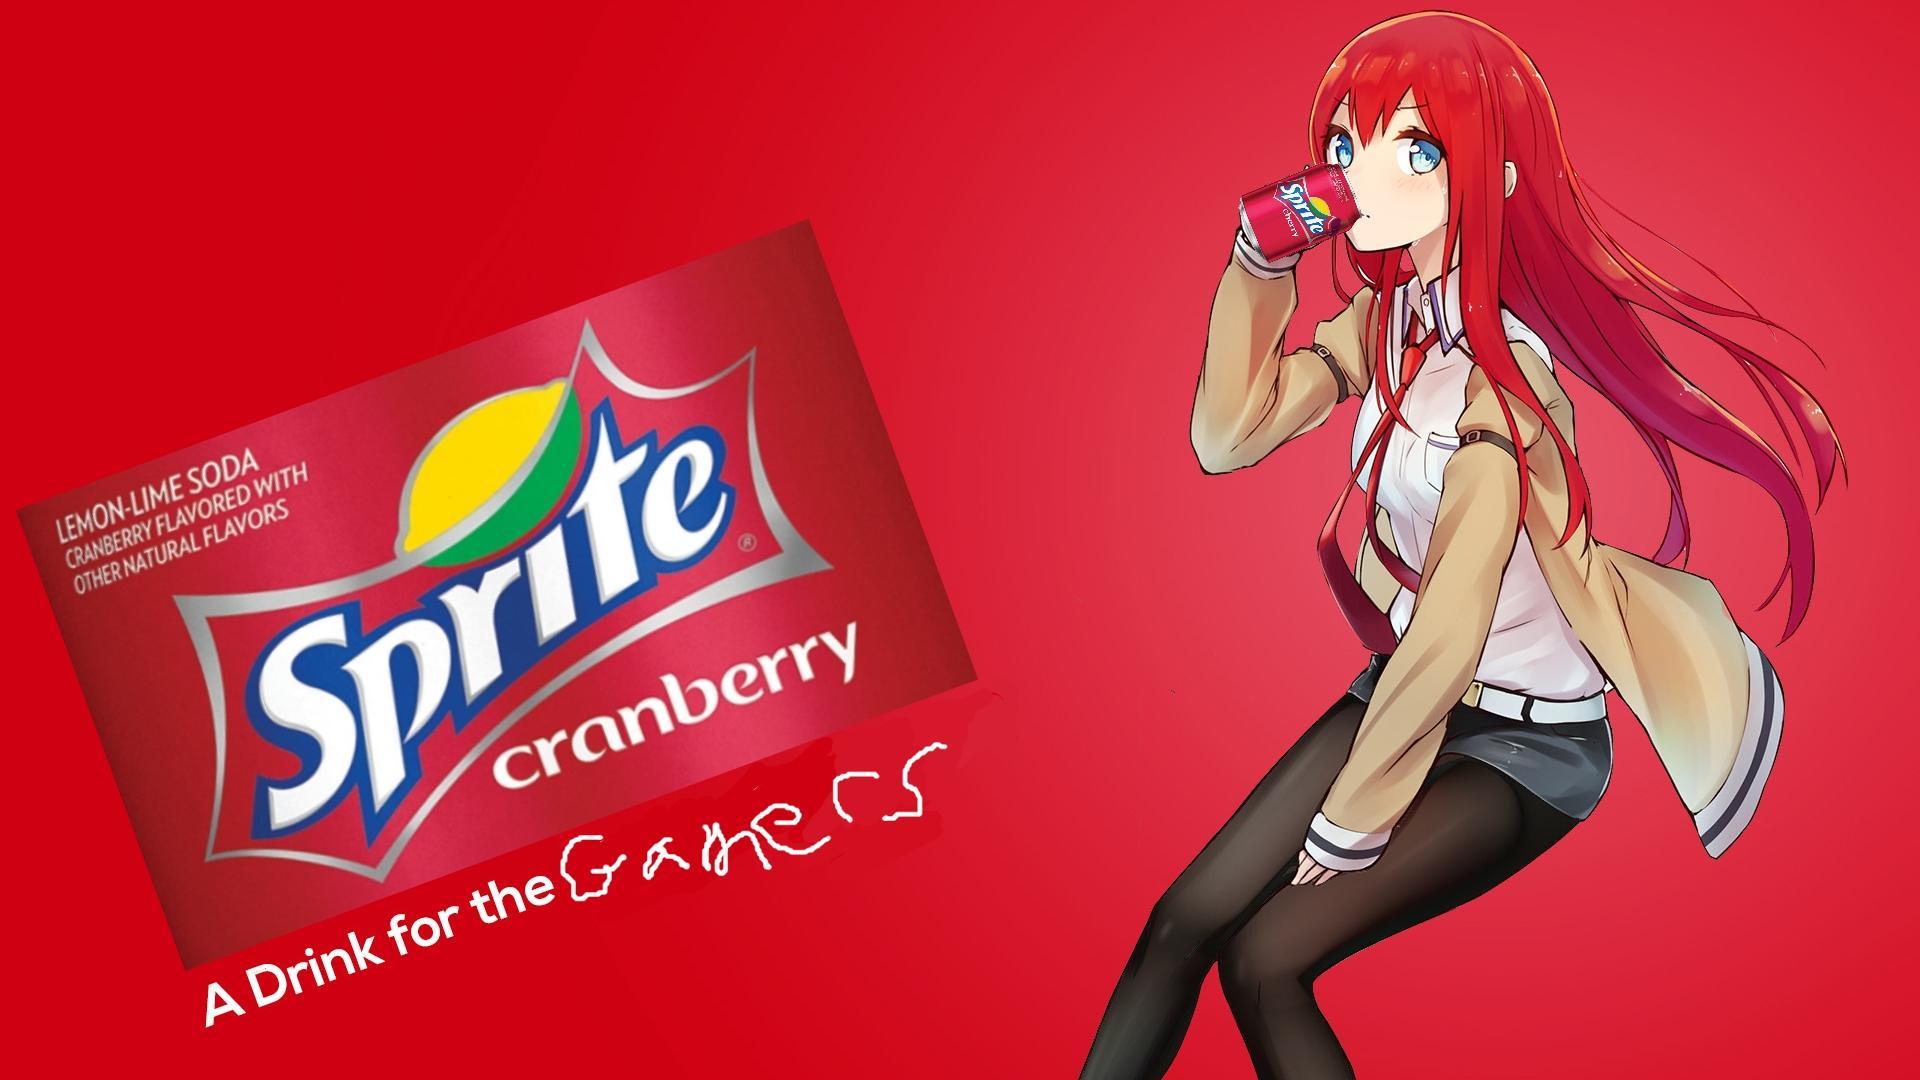 Sprite Cranberry Wallpapers Wallpaper Cave Nichijou for more content like this, just watch this. sprite cranberry wallpapers wallpaper